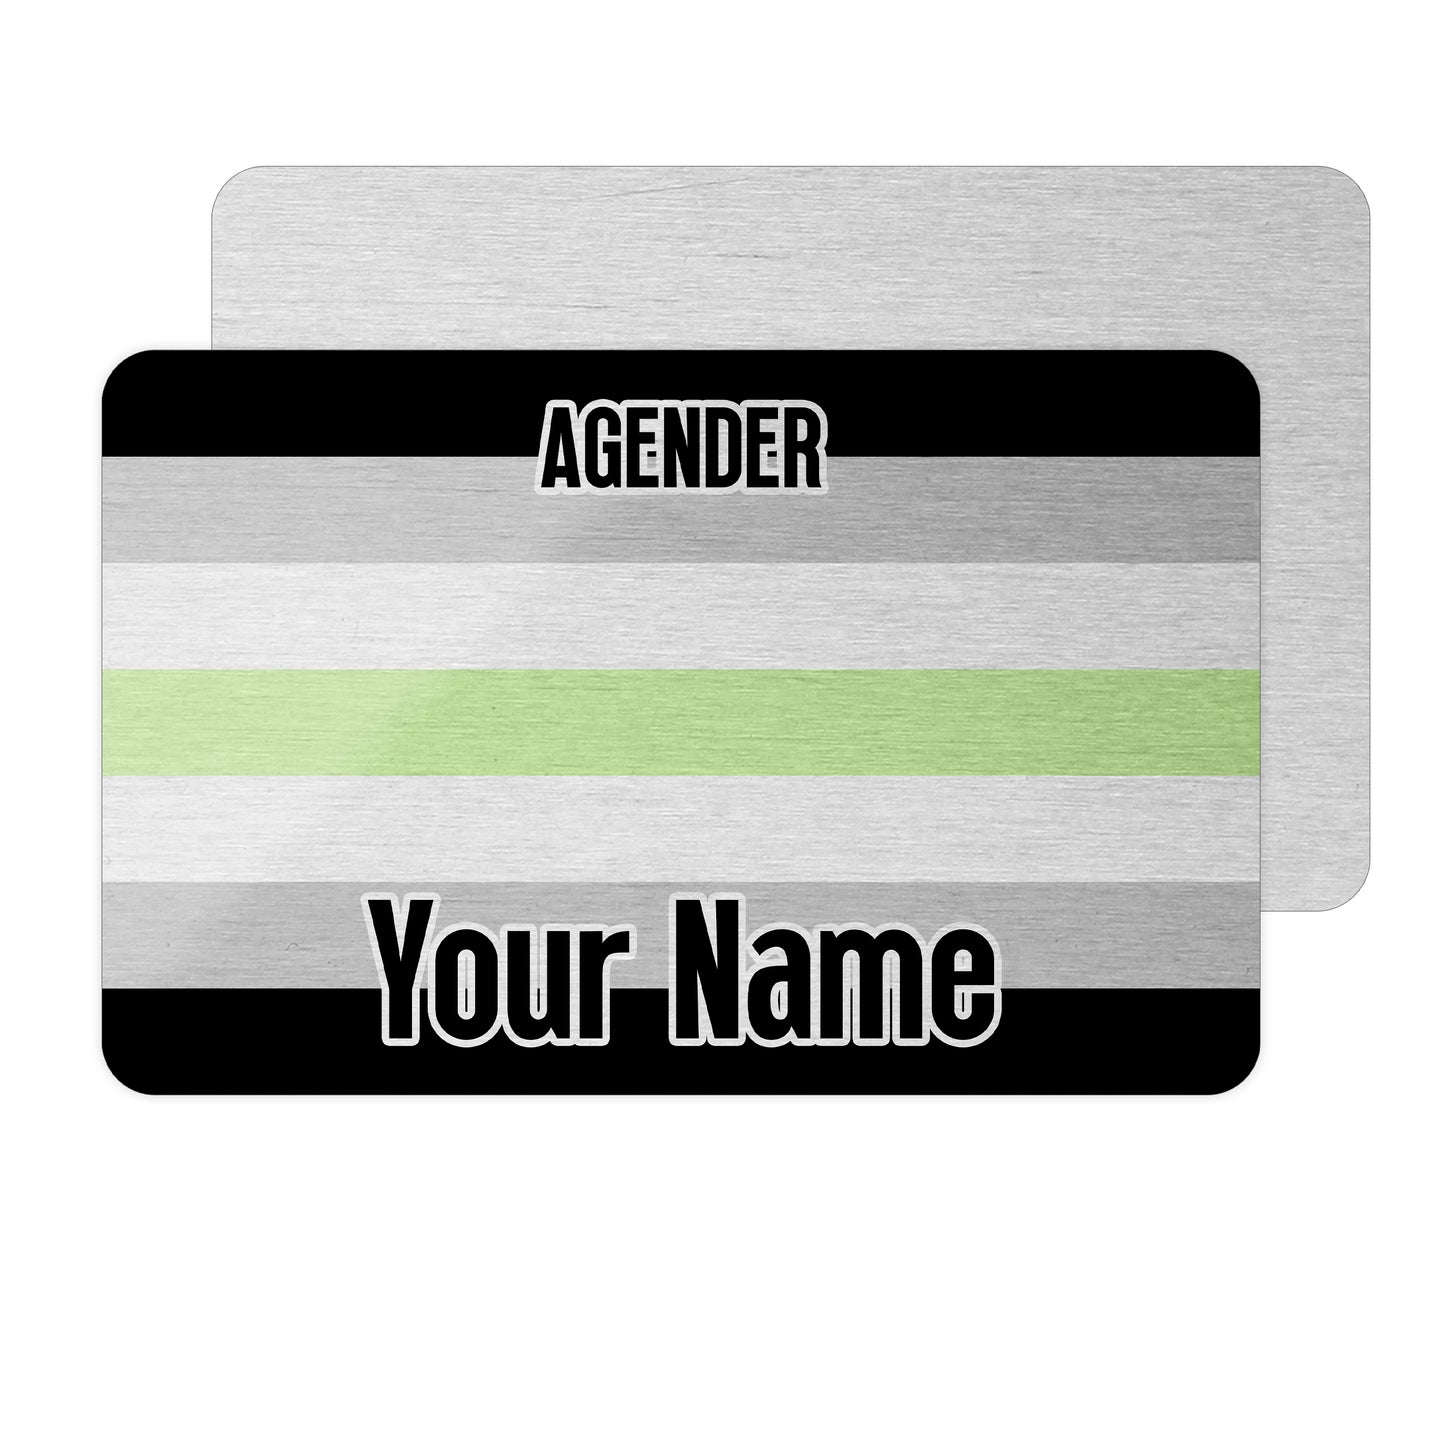 Aluminium Metal Wallet Card personalised with your name and the agender pride flag